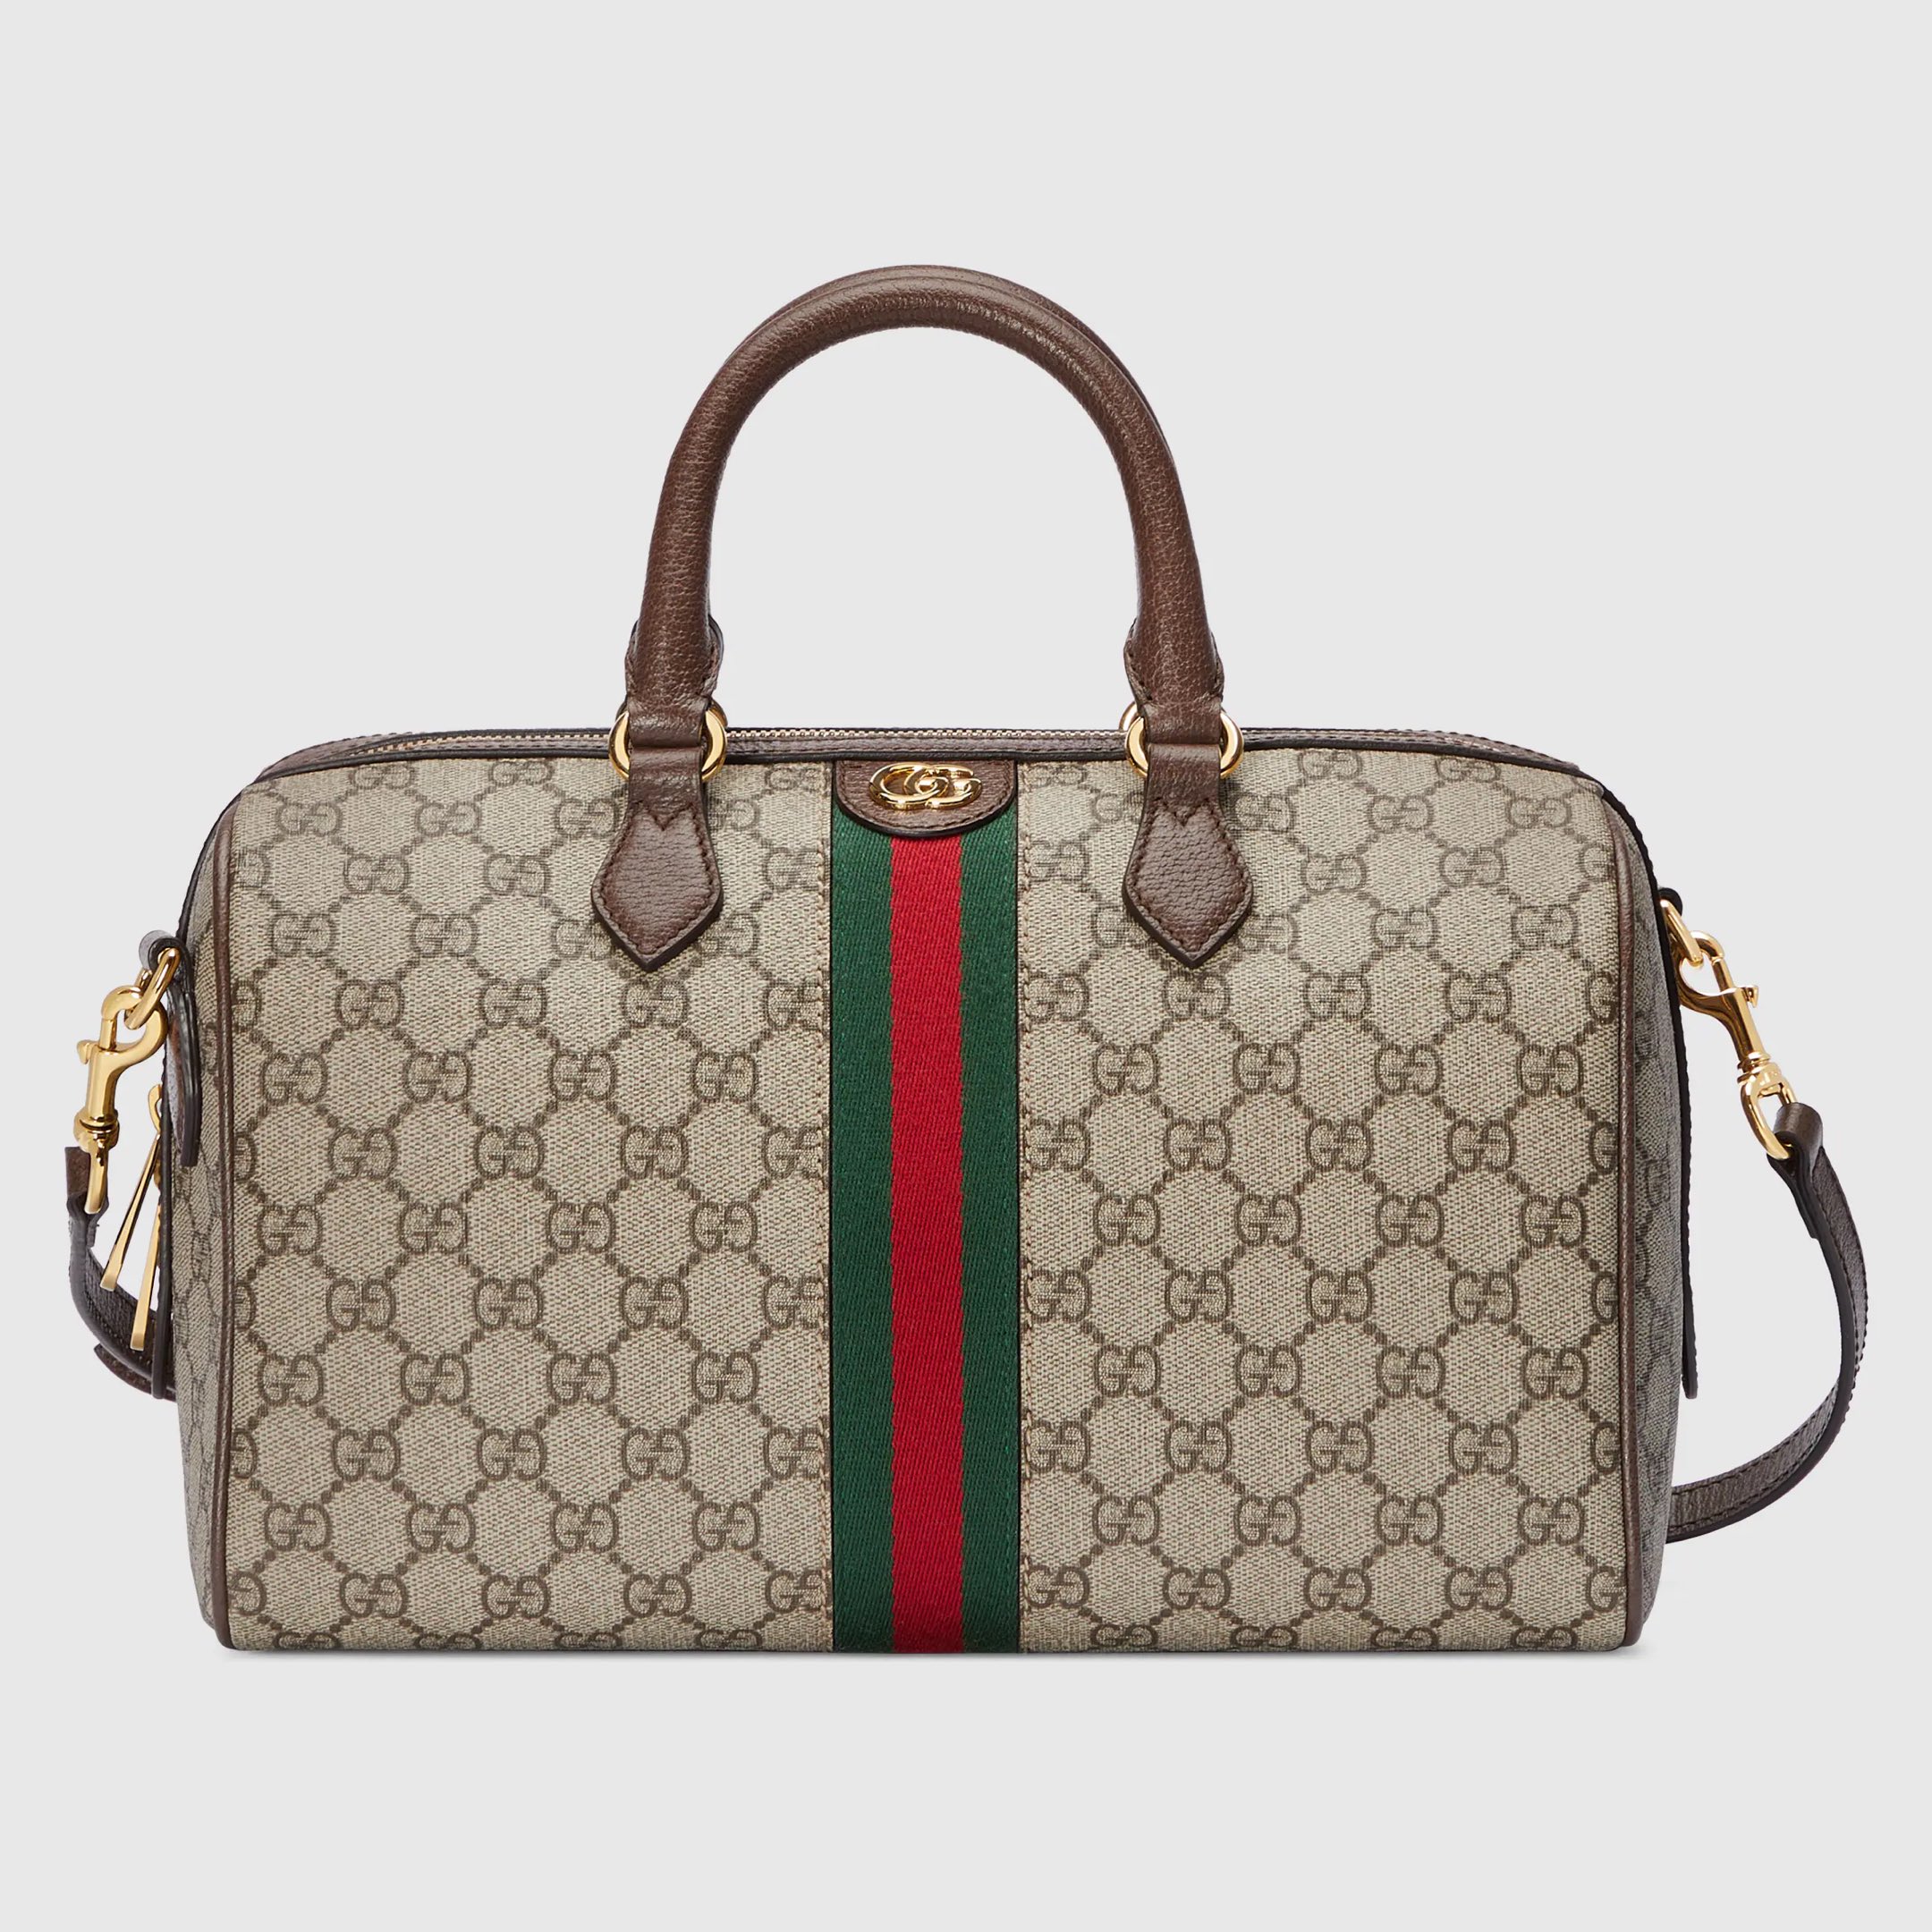 Copy
 Gucci Bags Handbags At Cheap Price
 Beige Brown Gold Canvas Cotton